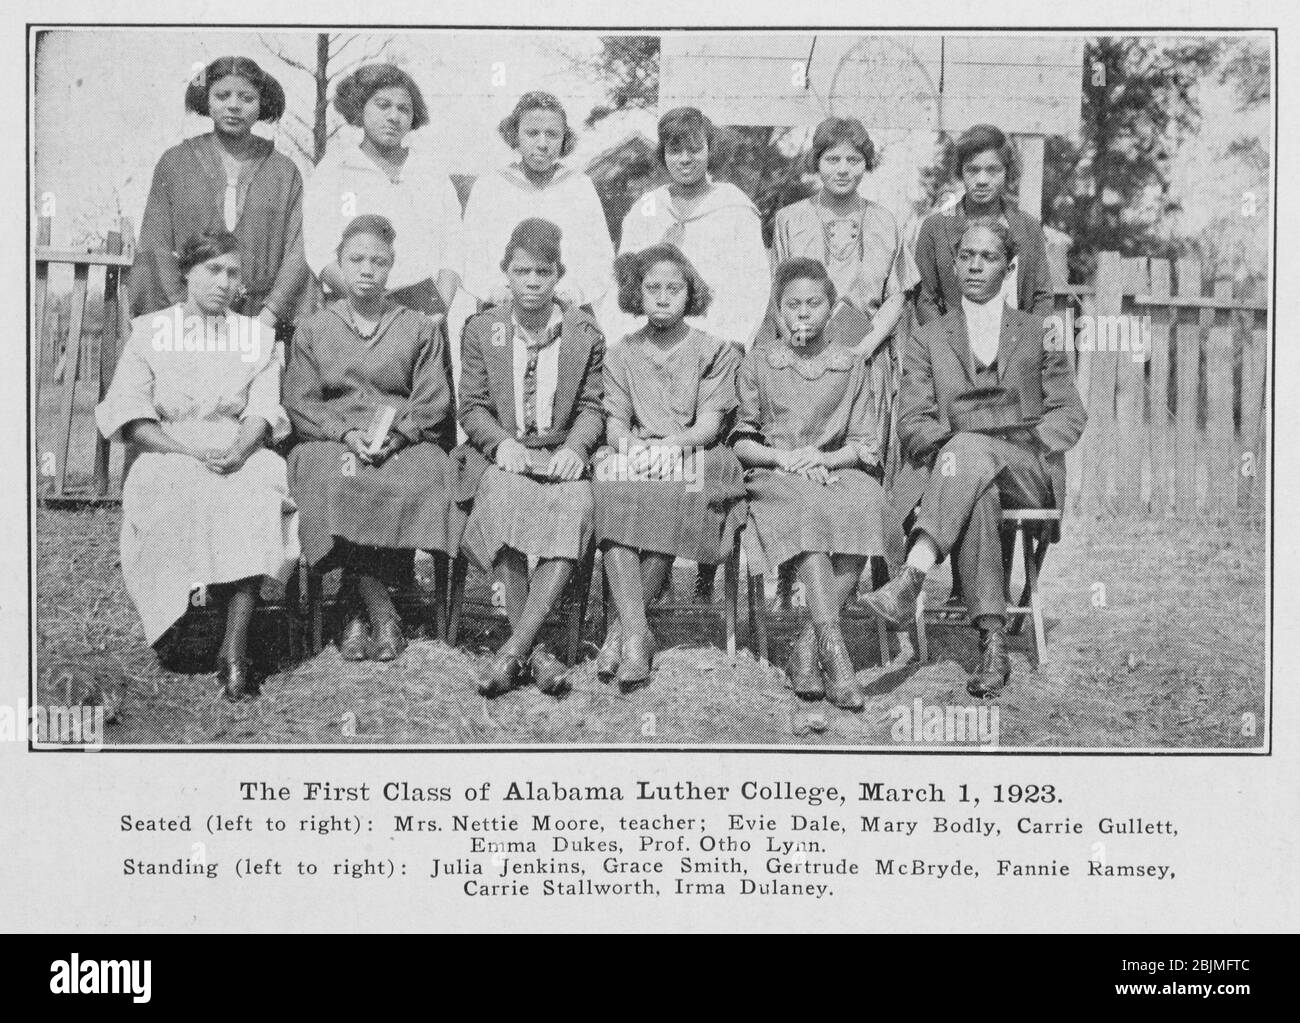 First Class of Alabama Luther College, March 1, 1923. Drewes, Christopher F. (1870-1931) (Author). Half a century of Lutheranism among our colored Stock Photo